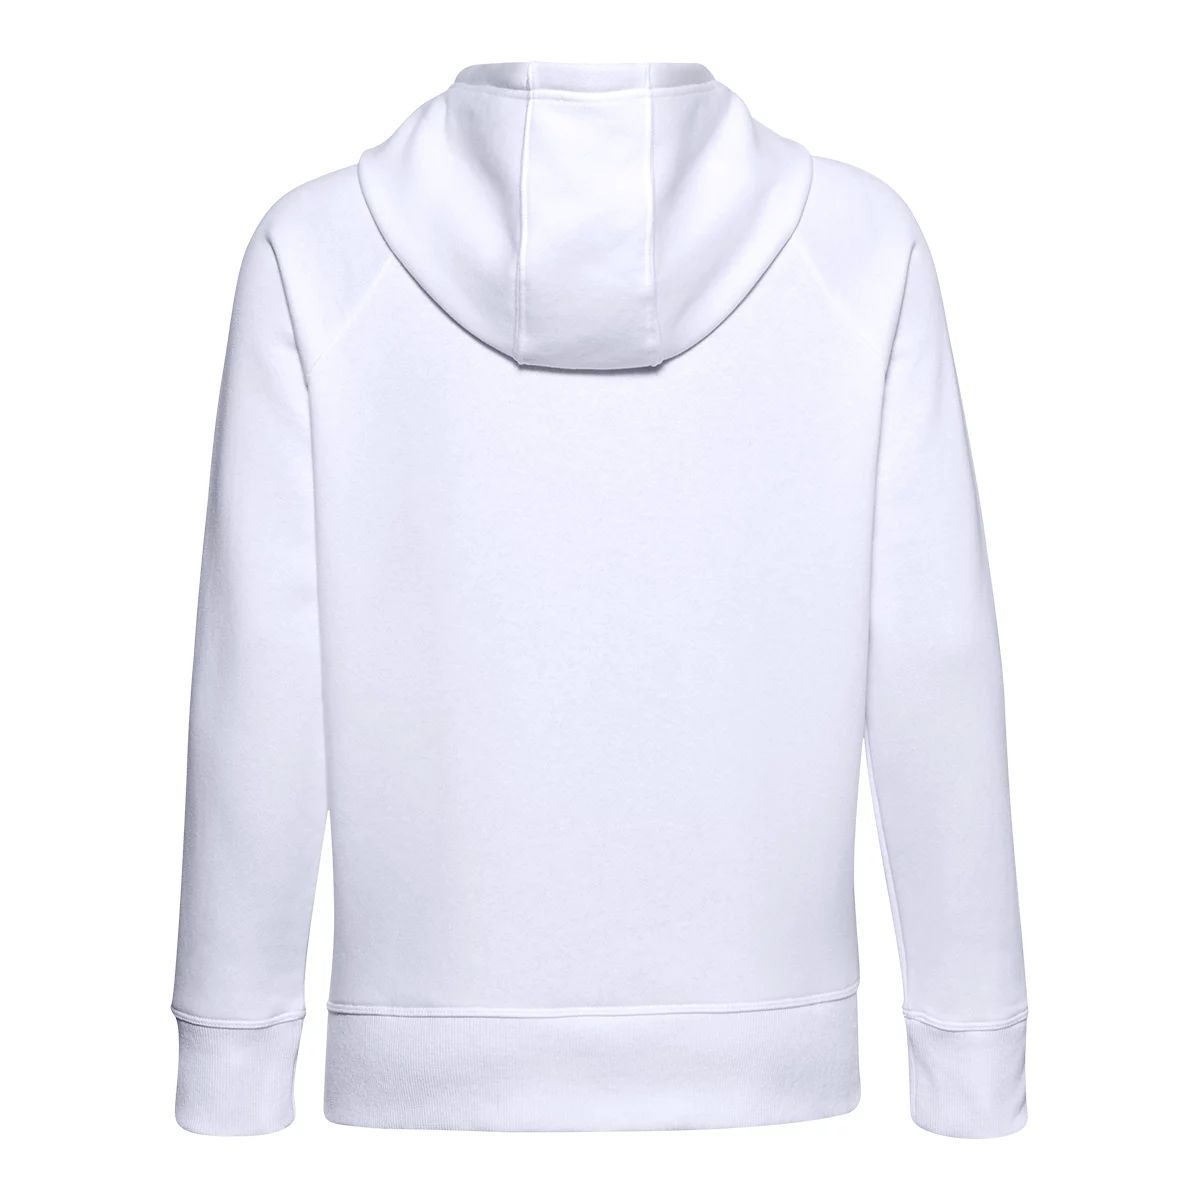 Under Armour' Women's Rival Fleece Oversized Hoodie - Rivalry – Trav's  Outfitter